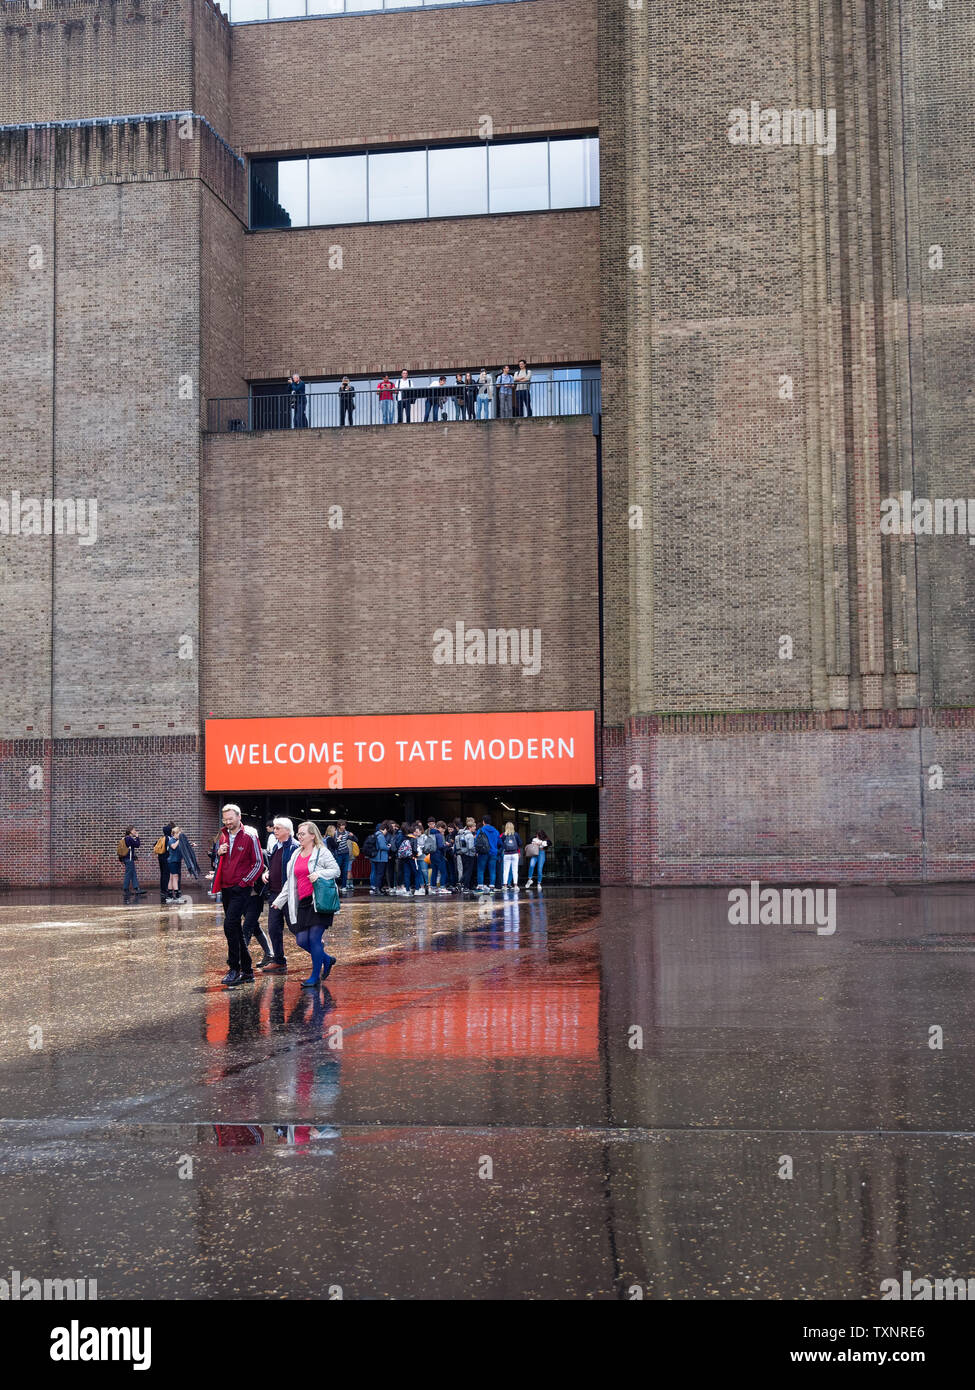 People queuing at the entrance to the New Tate Modern Art Gallery at Bankside, London, England, UK. Stock Photo